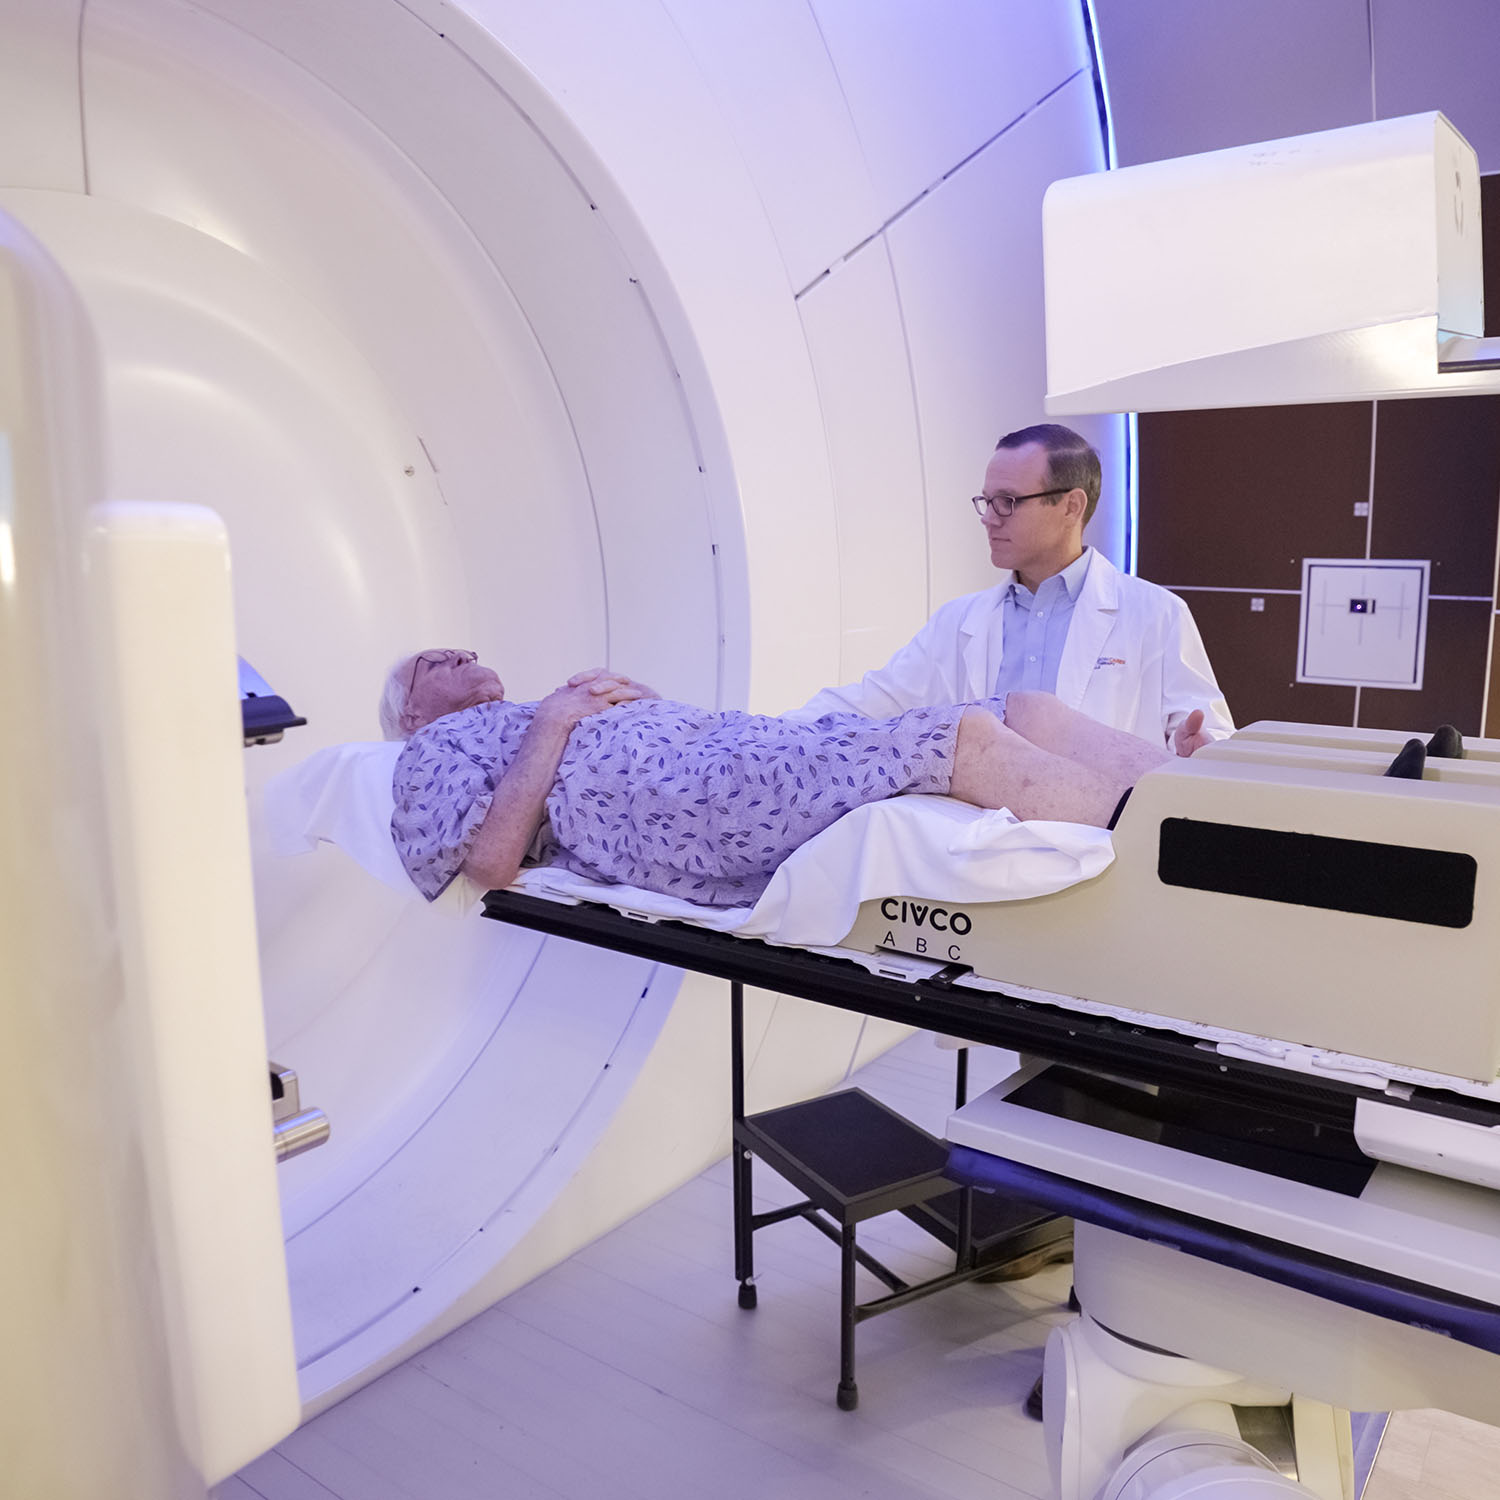 Prostate cancer patient lays on treatment table while radiation therapist aligns him for proton therapy